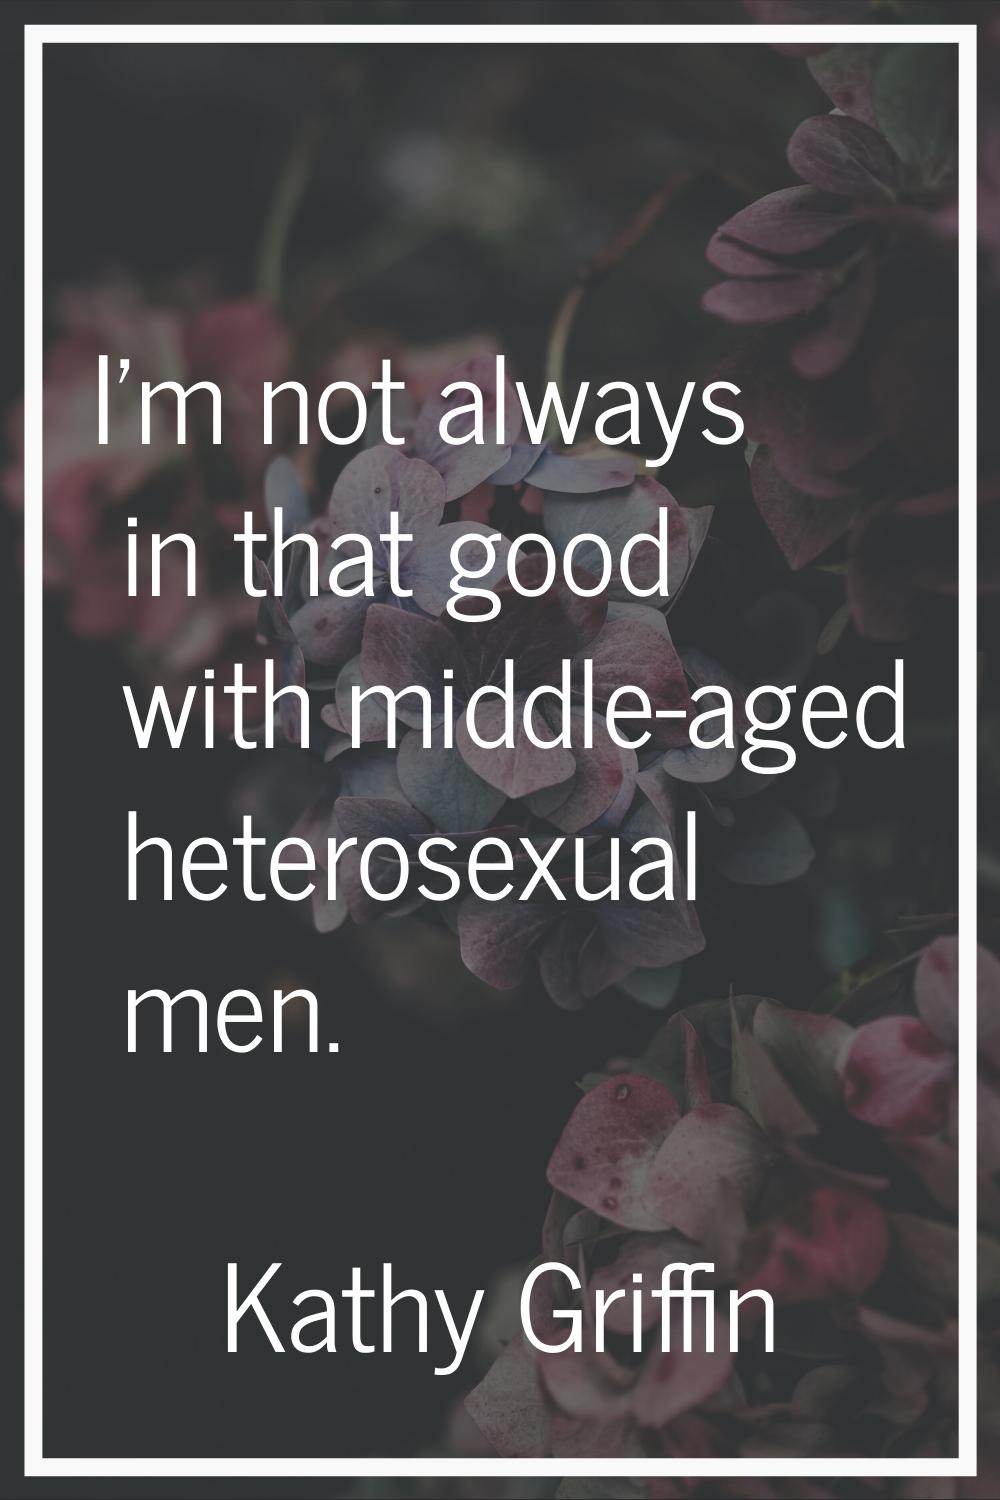 I'm not always in that good with middle-aged heterosexual men.